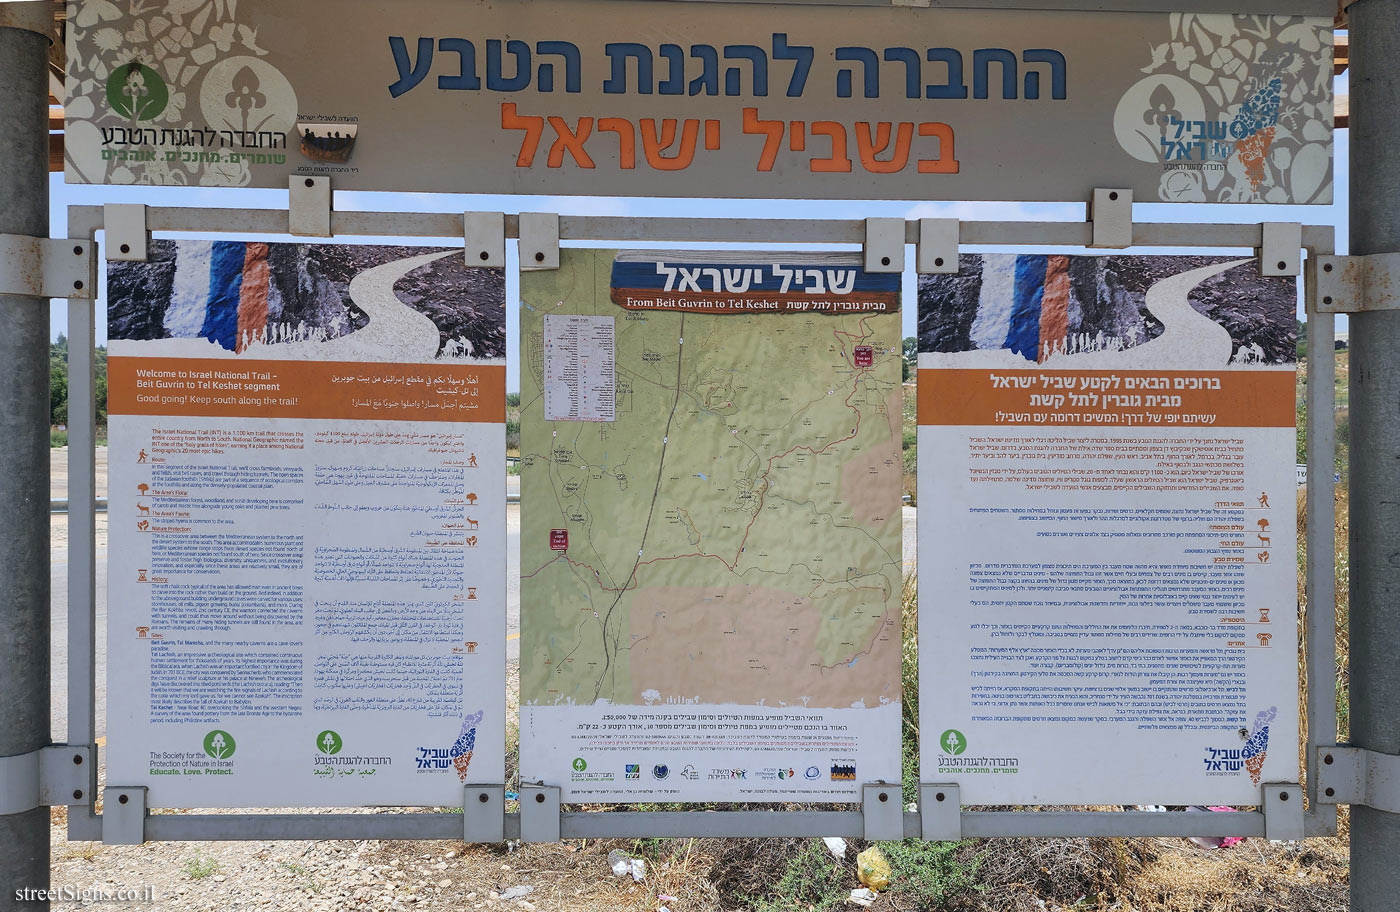 Israel National Trail - From Beit Guvrin to Tel Keshet